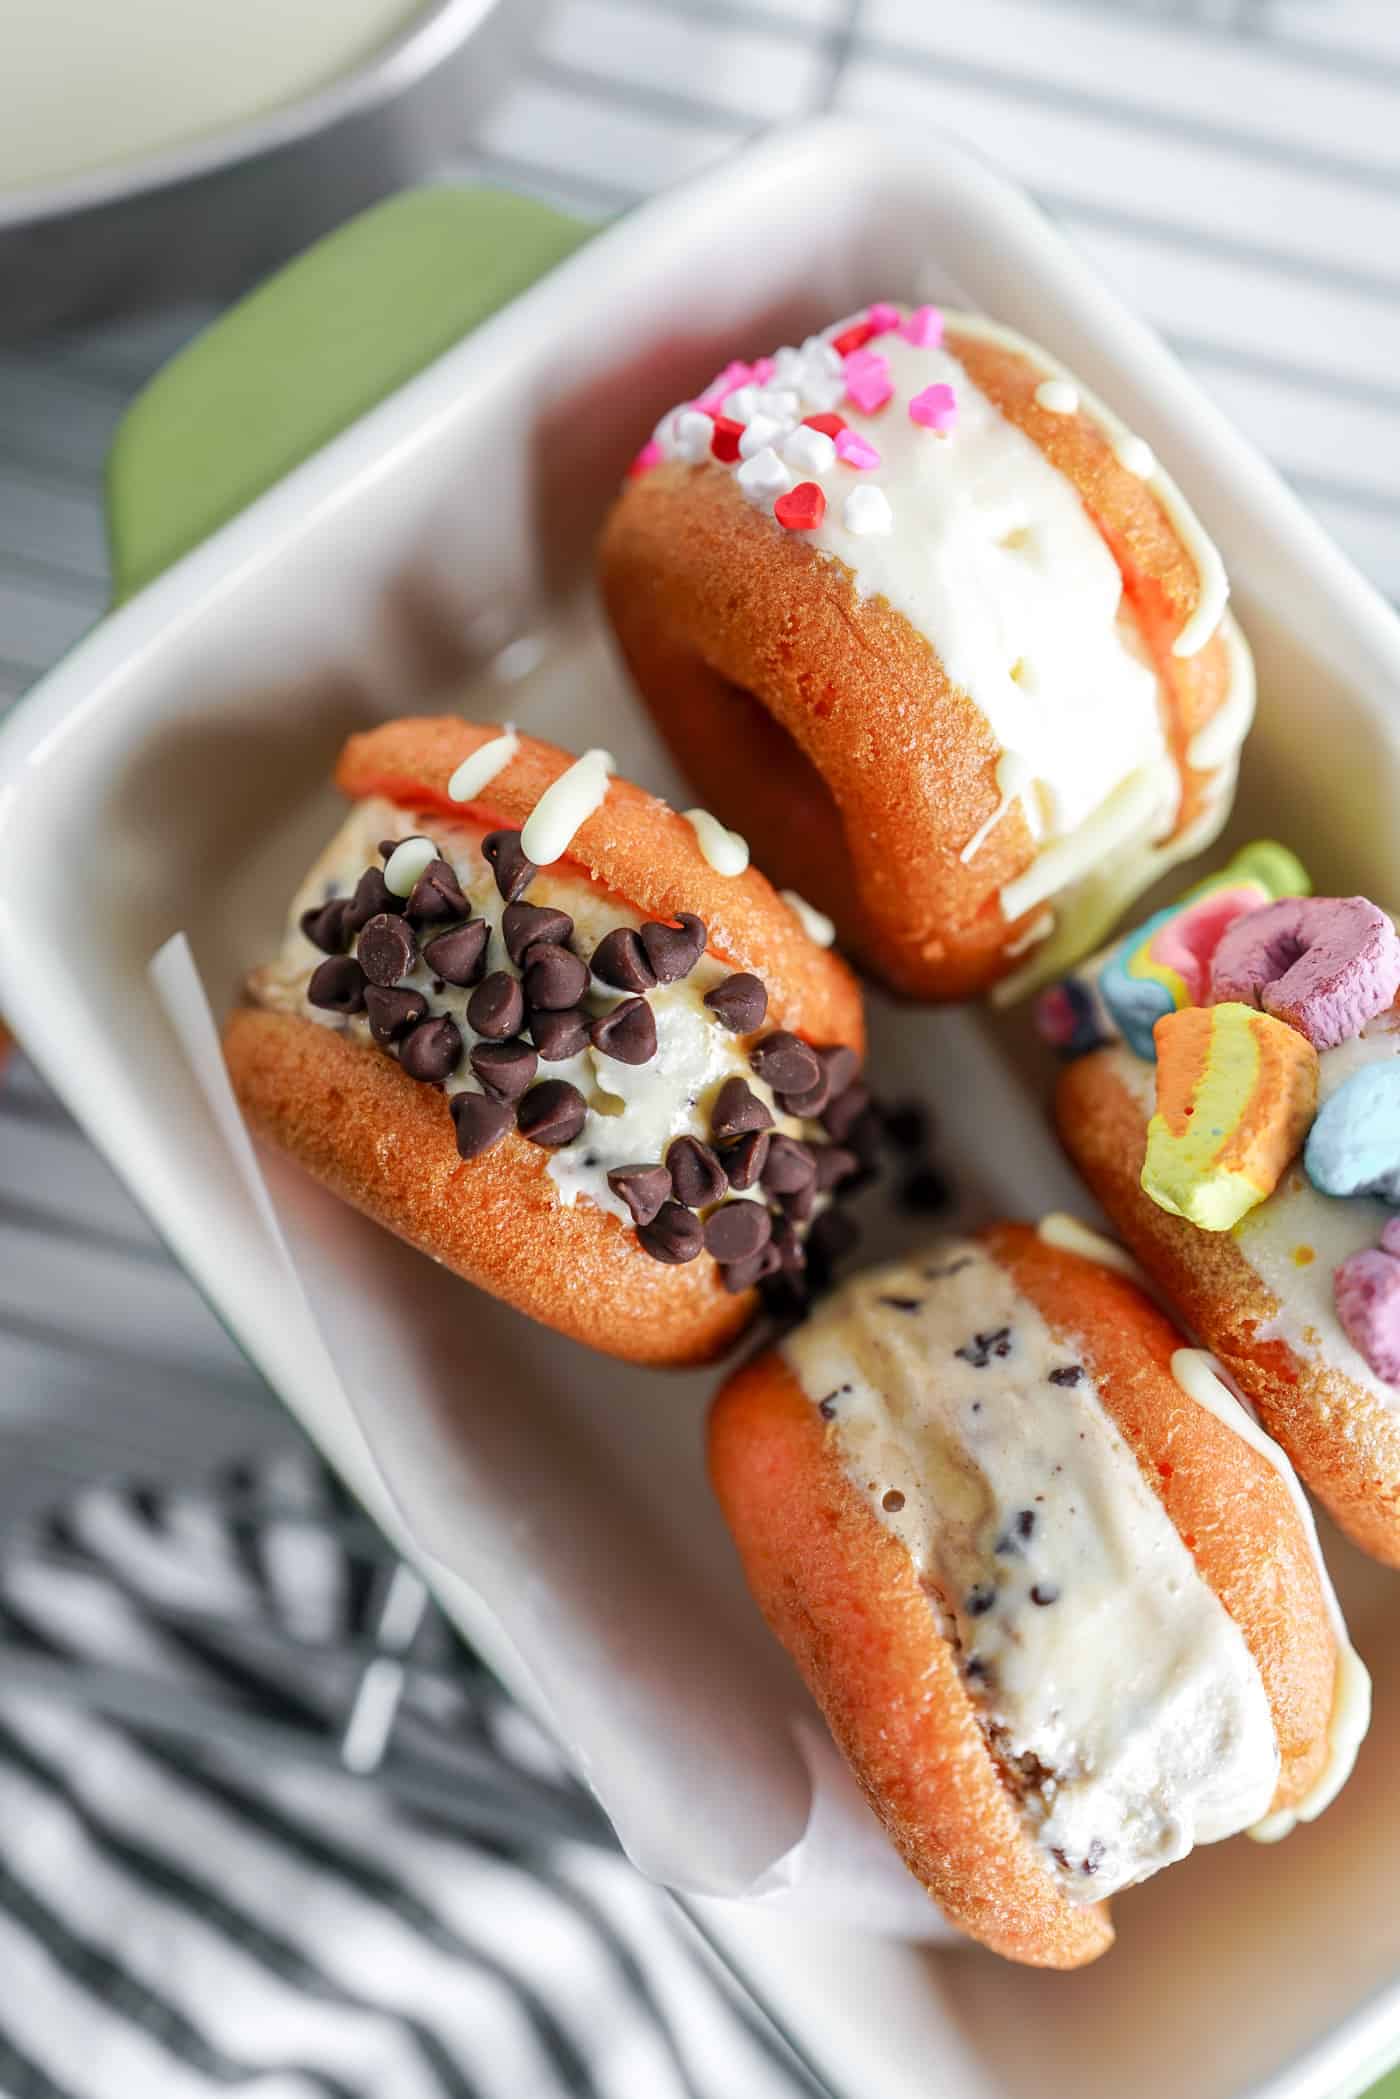 Four donut ice cream sandwiches in a small bowl with chocolate chunks